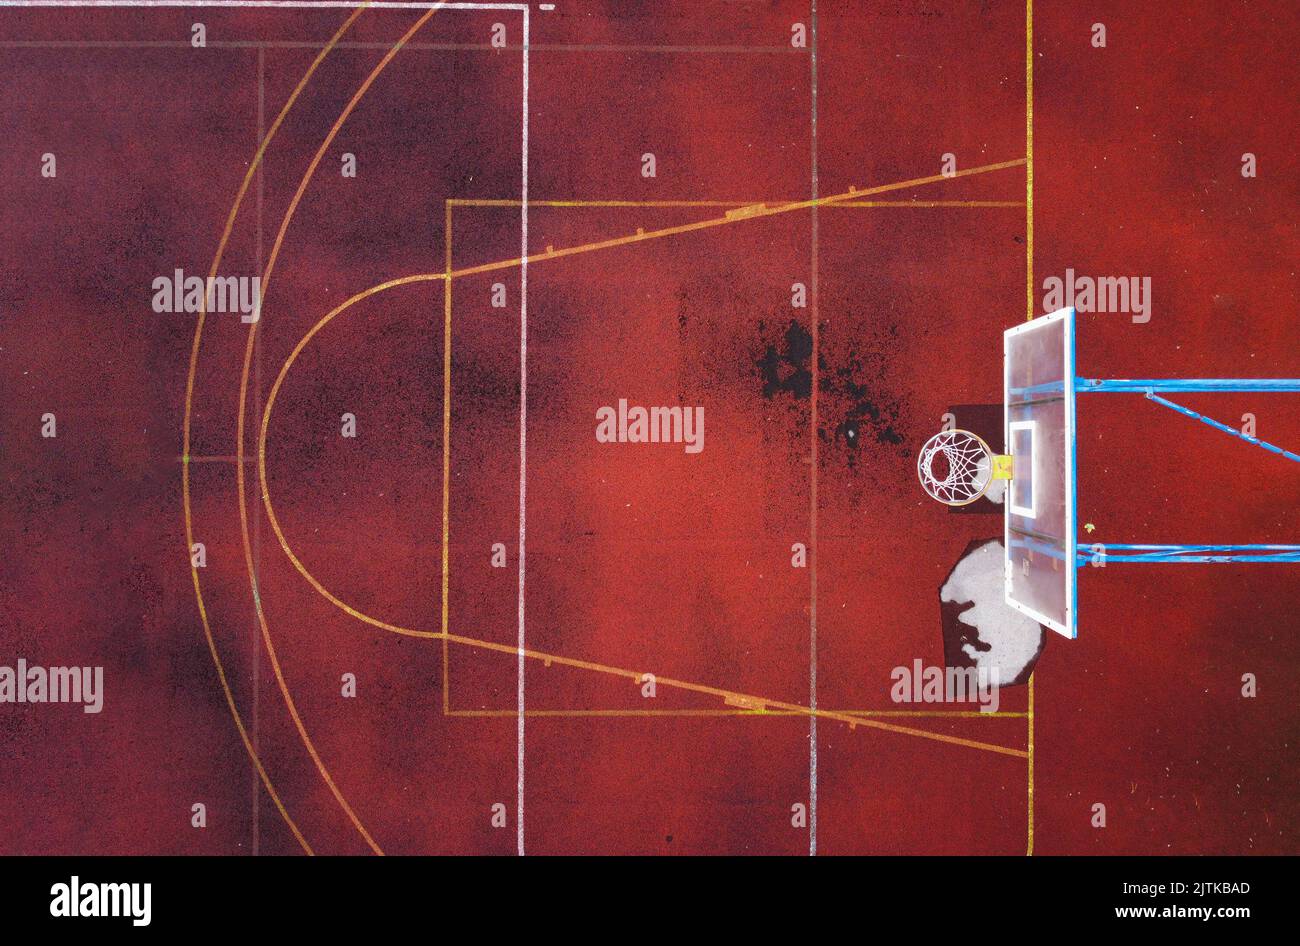 Top view of an old basketball court Stock Photo